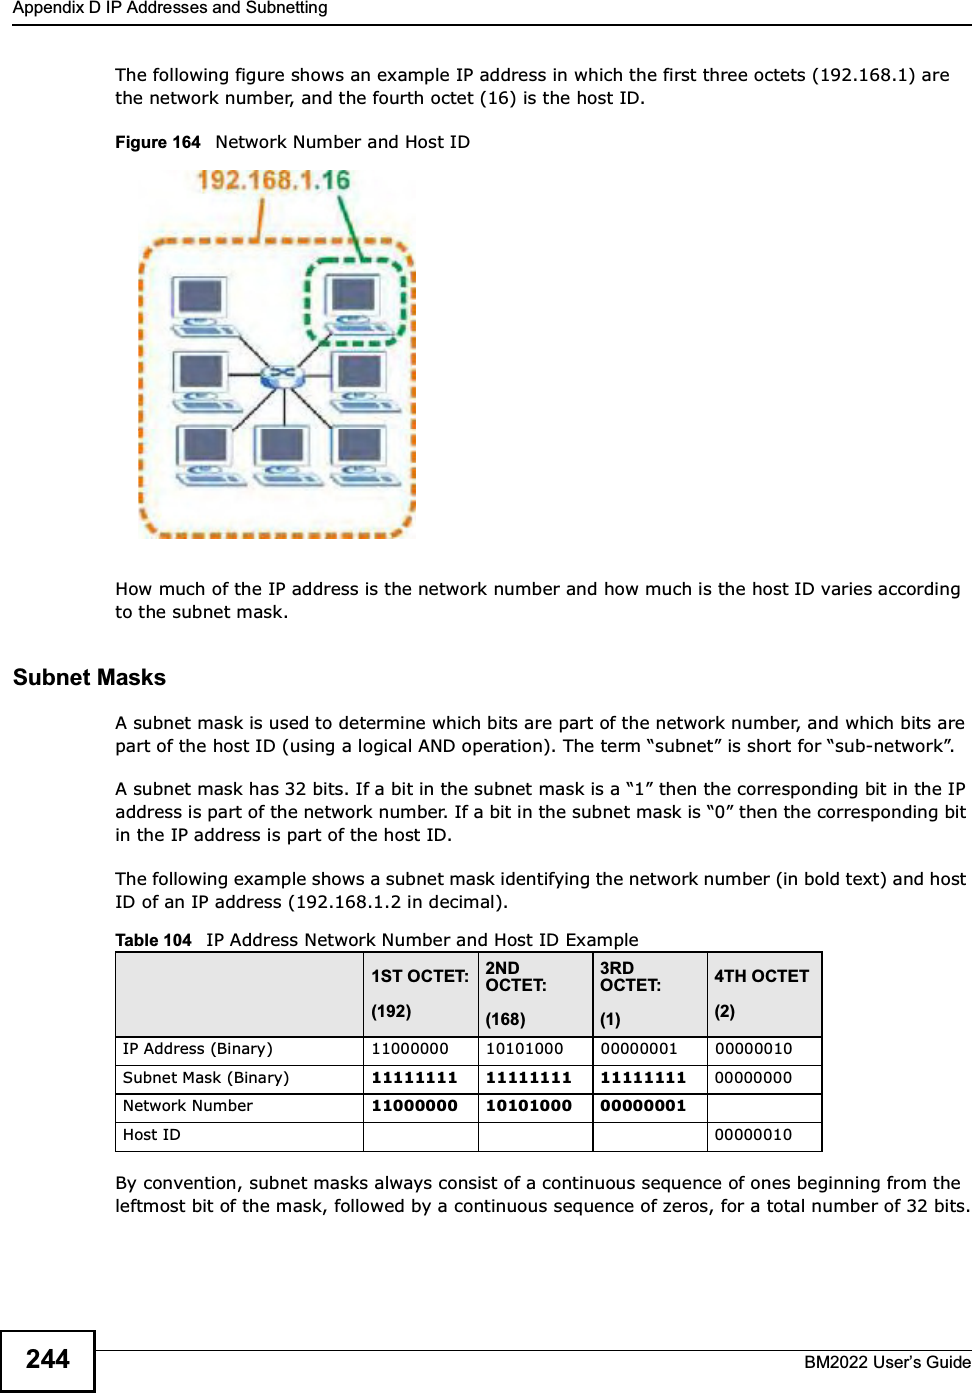 Appendix D IP Addresses and SubnettingBM2022 Users Guide244The following figure shows an example IP address in which the first three octets (192.168.1) are the network number, and the fourth octet (16) is the host ID.Figure 164   Network Number and Host IDHow much of the IP address is the network number and how much is the host ID varies according to the subnet mask.  Subnet MasksA subnet mask is used to determine which bits are part of the network number, and which bits are part of the host ID (using a logical AND operation). The term subnet is short for sub-network.A subnet mask has 32 bits. If a bit in the subnet mask is a 1 then the corresponding bit in the IP address is part of the network number. If a bit in the subnet mask is 0 then the corresponding bit in the IP address is part of the host ID. The following example shows a subnet mask identifying the network number (in bold text) and host ID of an IP address (192.168.1.2 in decimal).By convention, subnet masks always consist of a continuous sequence of ones beginning from the leftmost bit of the mask, followed by a continuous sequence of zeros, for a total number of 32 bits.Table 104   IP Address Network Number and Host ID Example1ST OCTET:(192)2ND OCTET:(168)3RD OCTET:(1)4TH OCTET(2)IP Address (Binary) 11000000 10101000 00000001 00000010Subnet Mask (Binary) 11111111 11111111 11111111 00000000Network Number 11000000 10101000 00000001Host ID 00000010